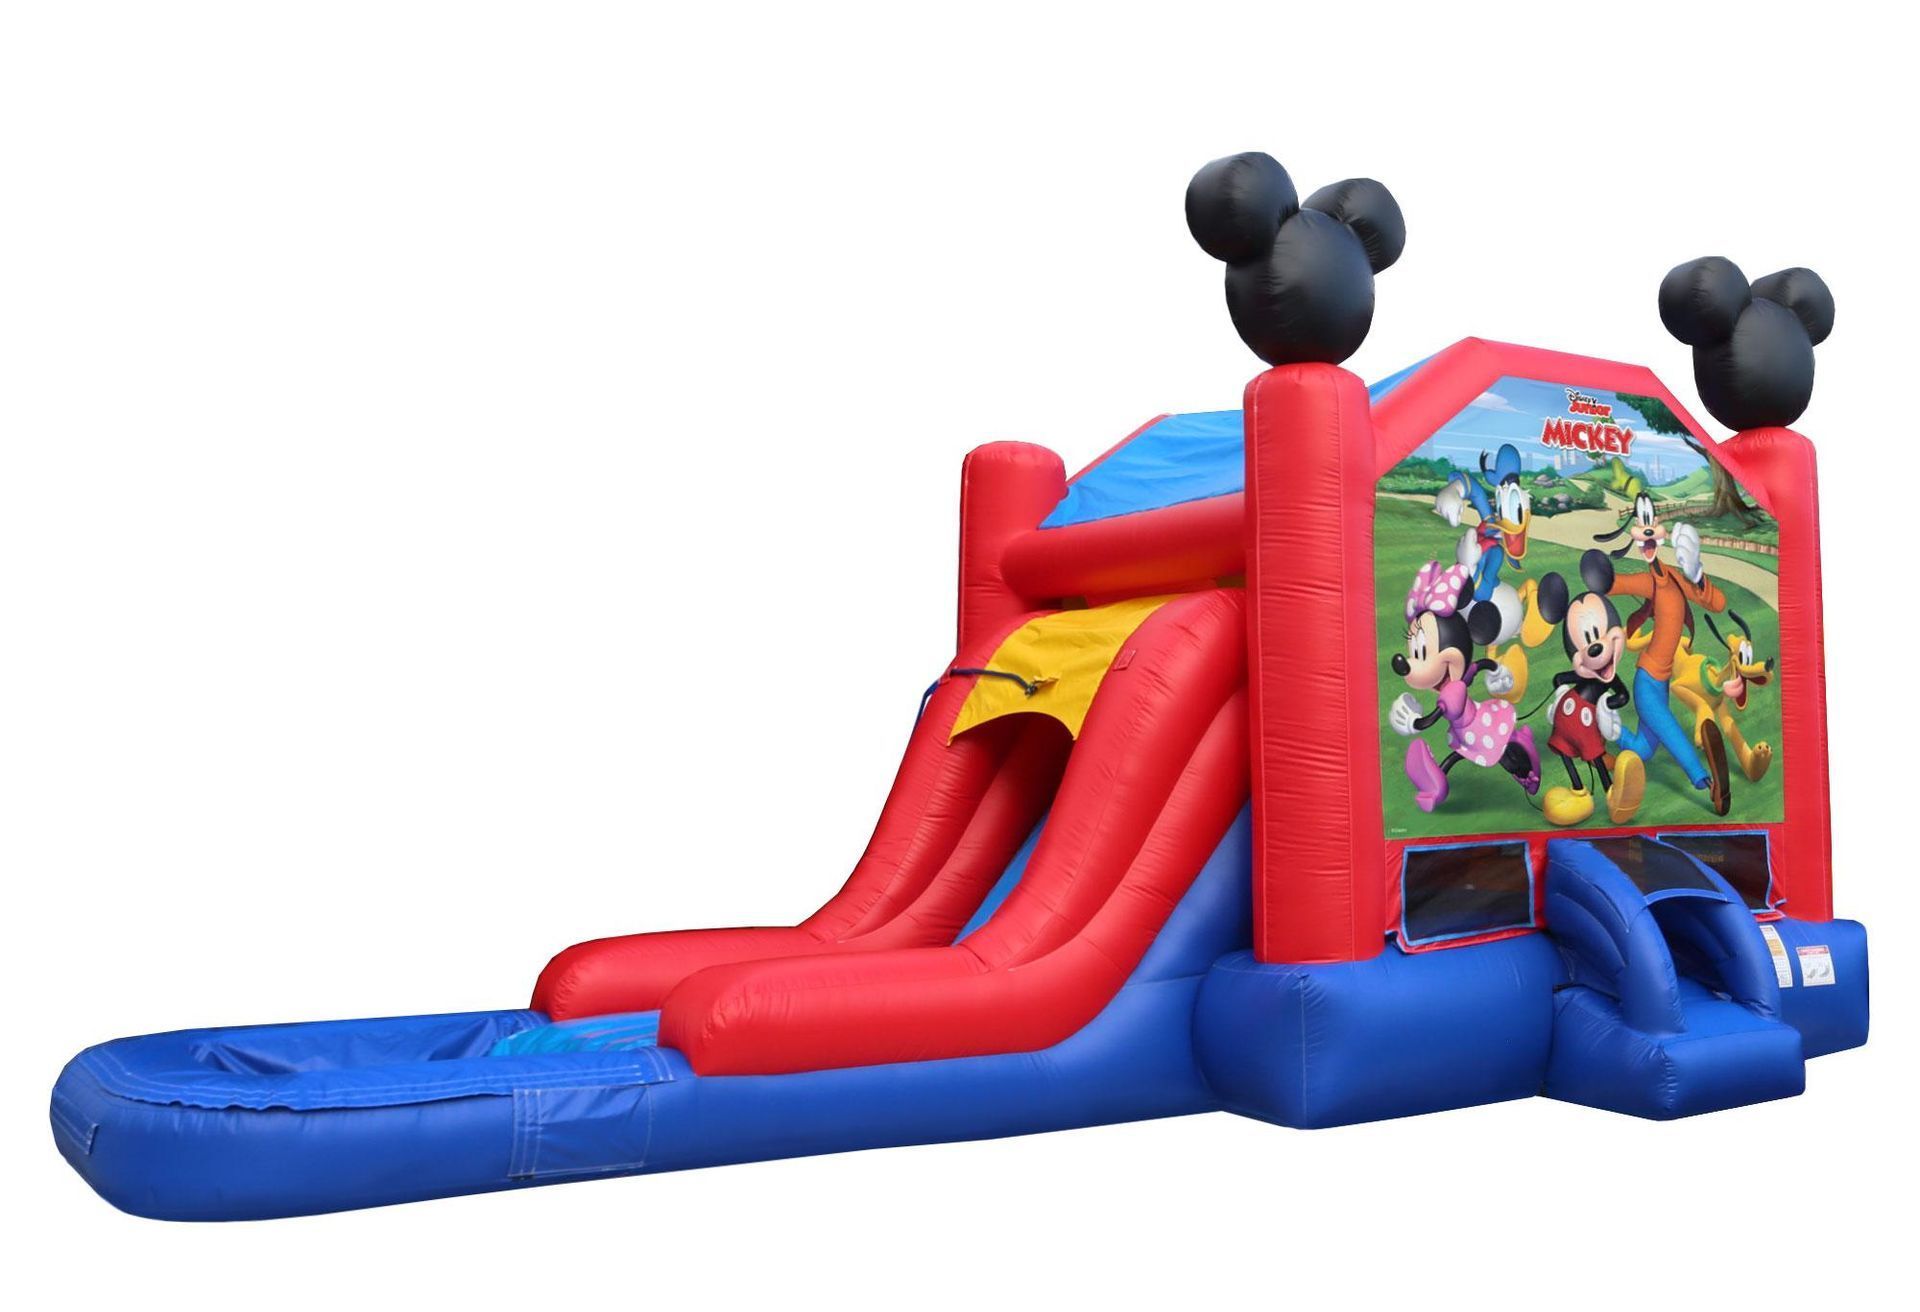 Mickey Mouse Bouncy House with a Slide and a Water Slide | Rancho Cucamonga, CA | Jam Jam House of Party Rentals